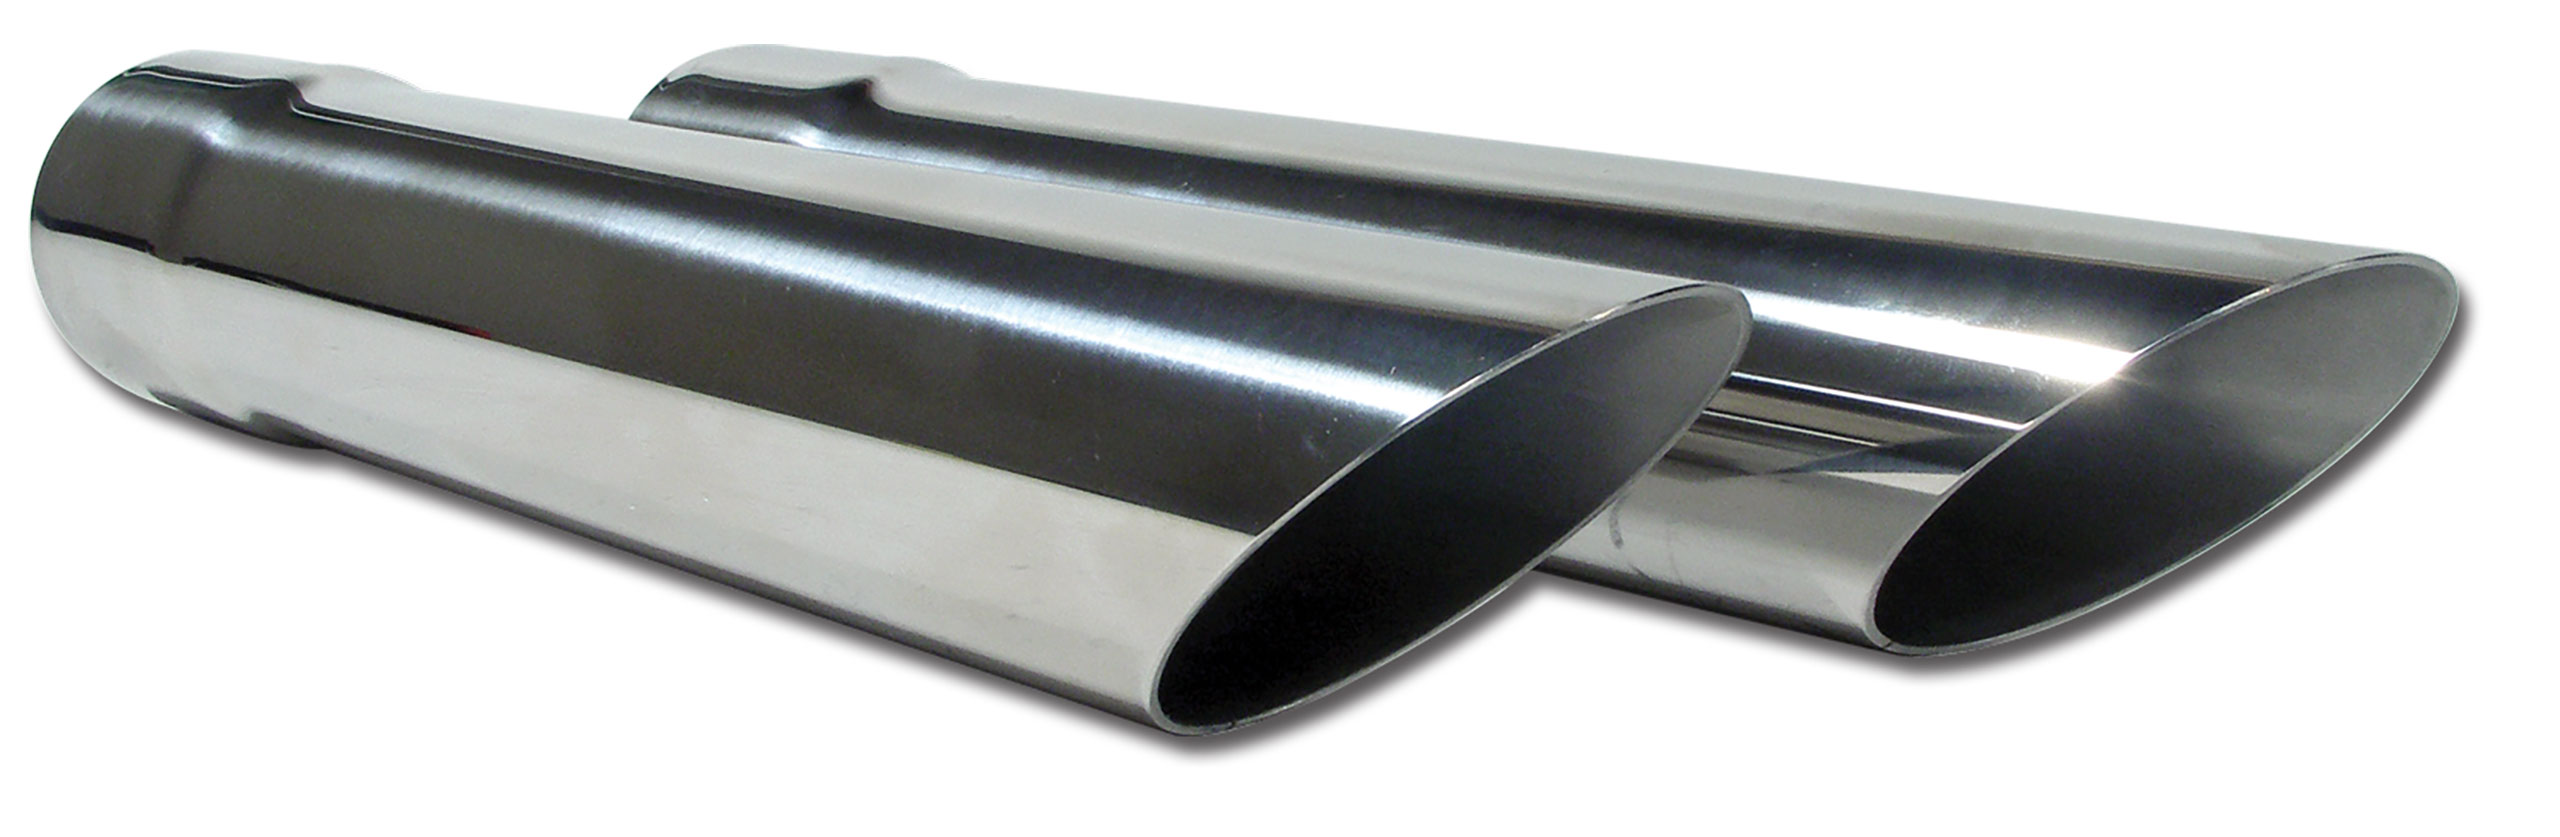 C2 1963-1967 Chevrolet Corvette Exhaust Extensions - Stainless Steel W/Weld & Numbers - CA